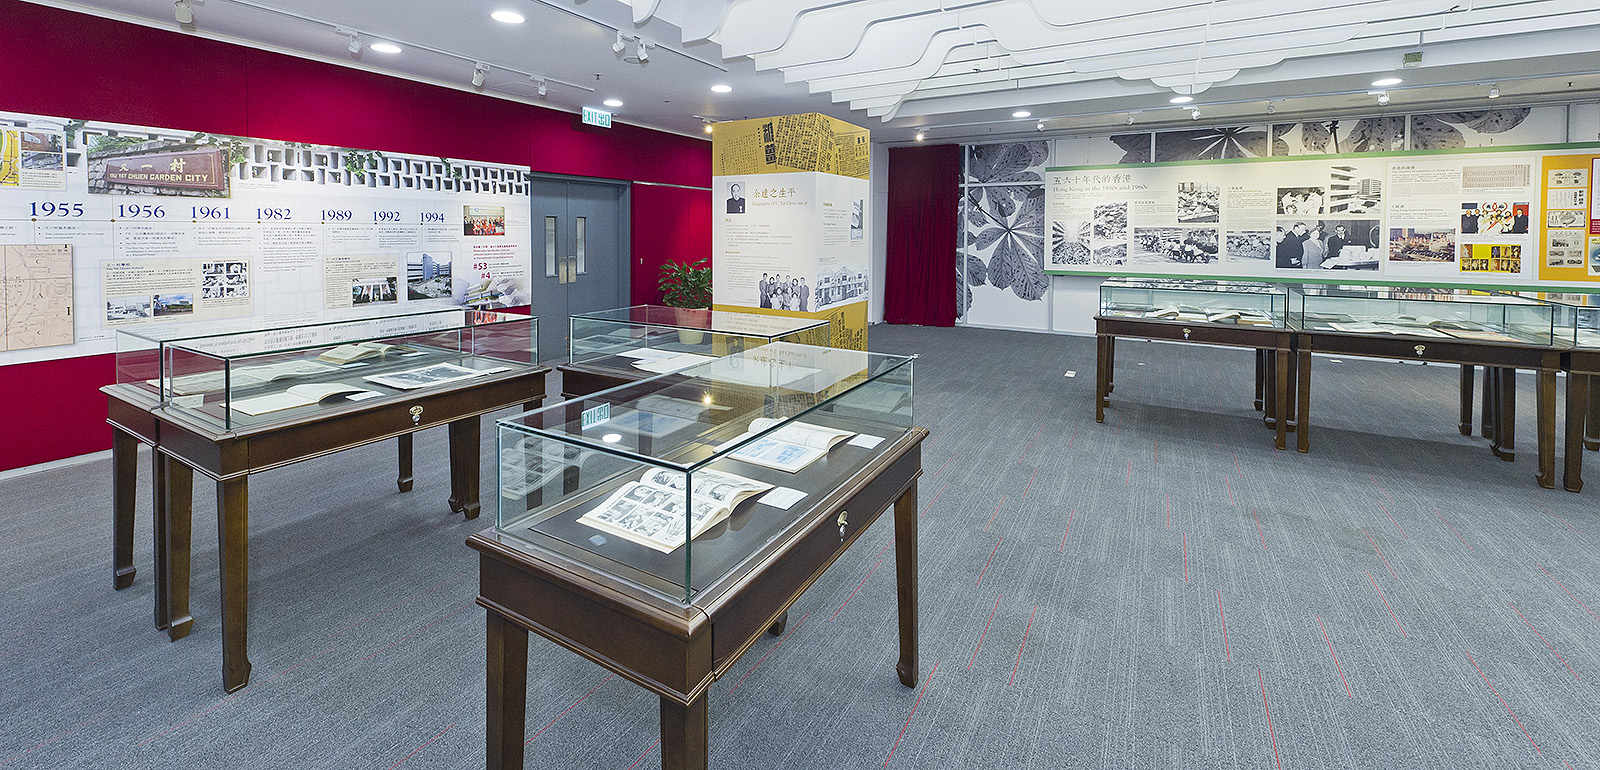 The “Post-war Hong Kong and the Story of Tat Chee Avenue” Exhibition 